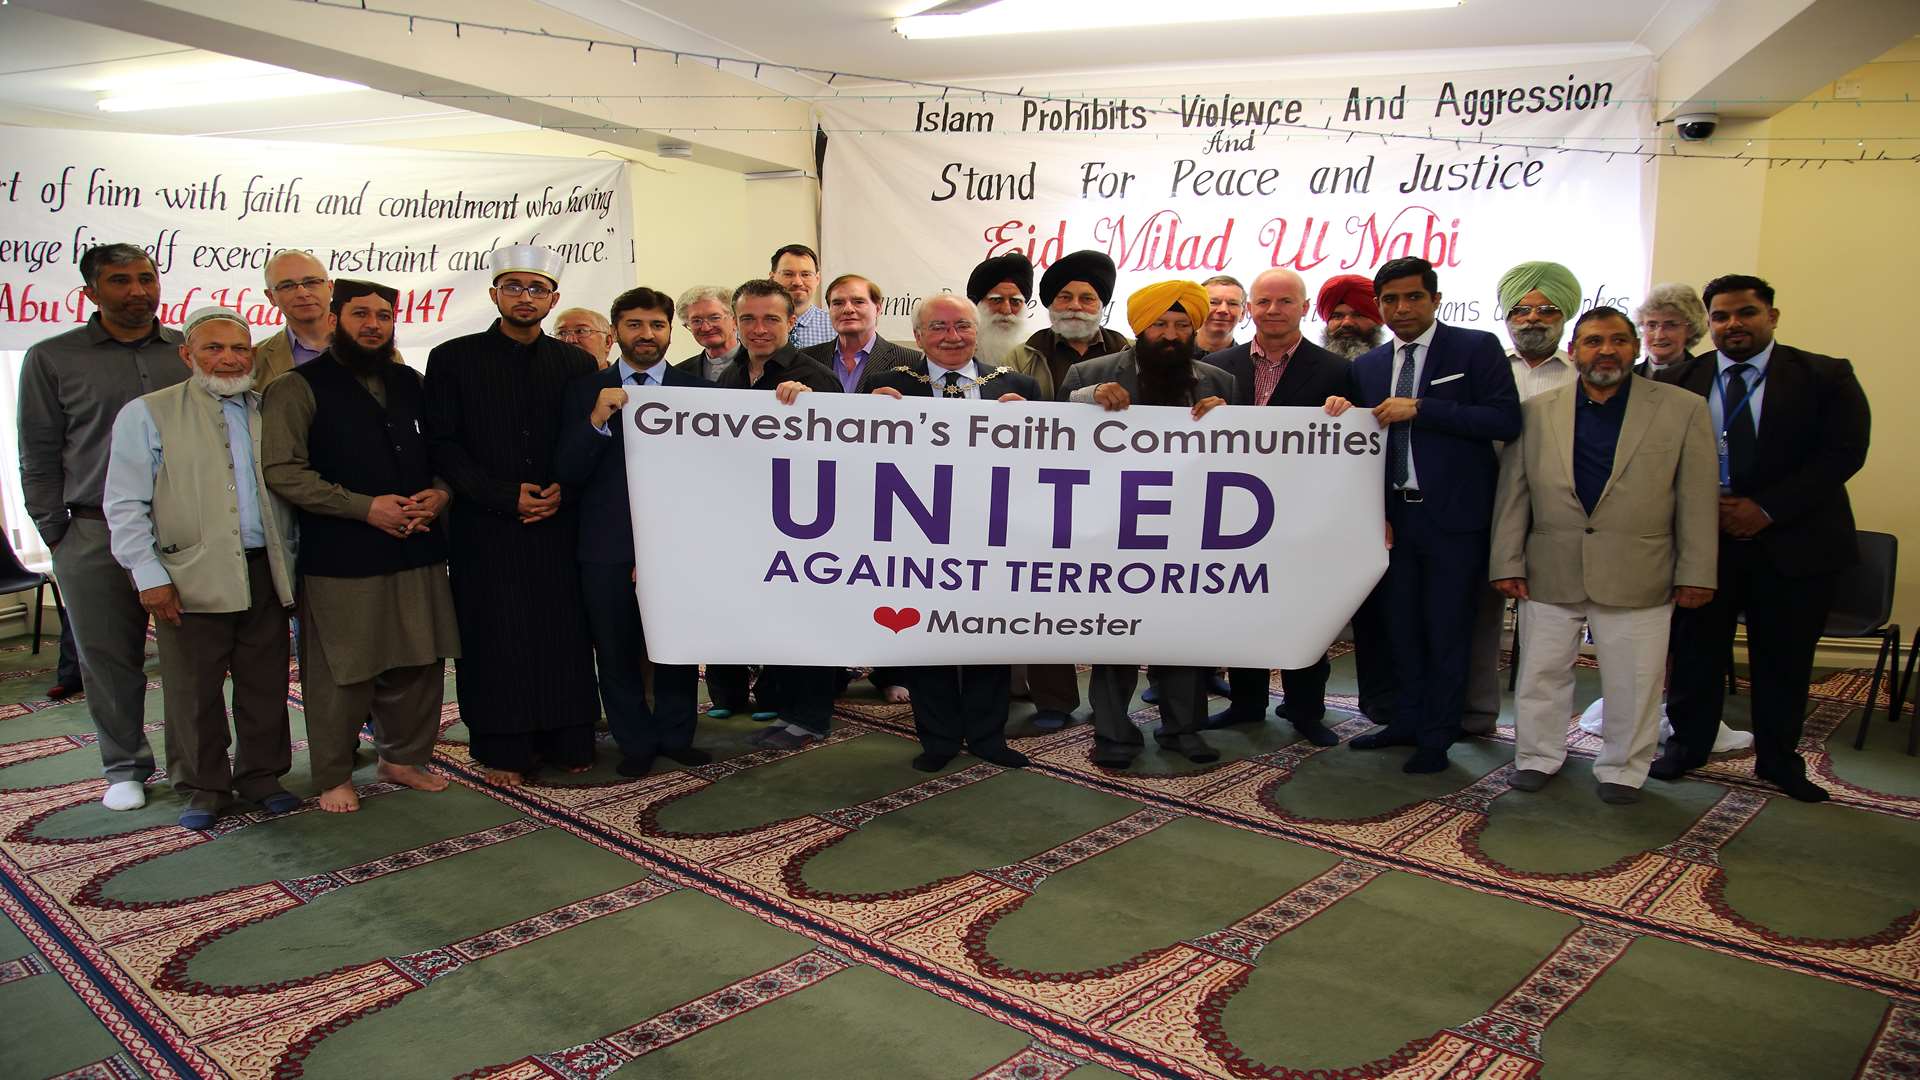 An inter-faith community event at Gravesend mosque in a display of unity against terrorism. Picture: Sarah Knight